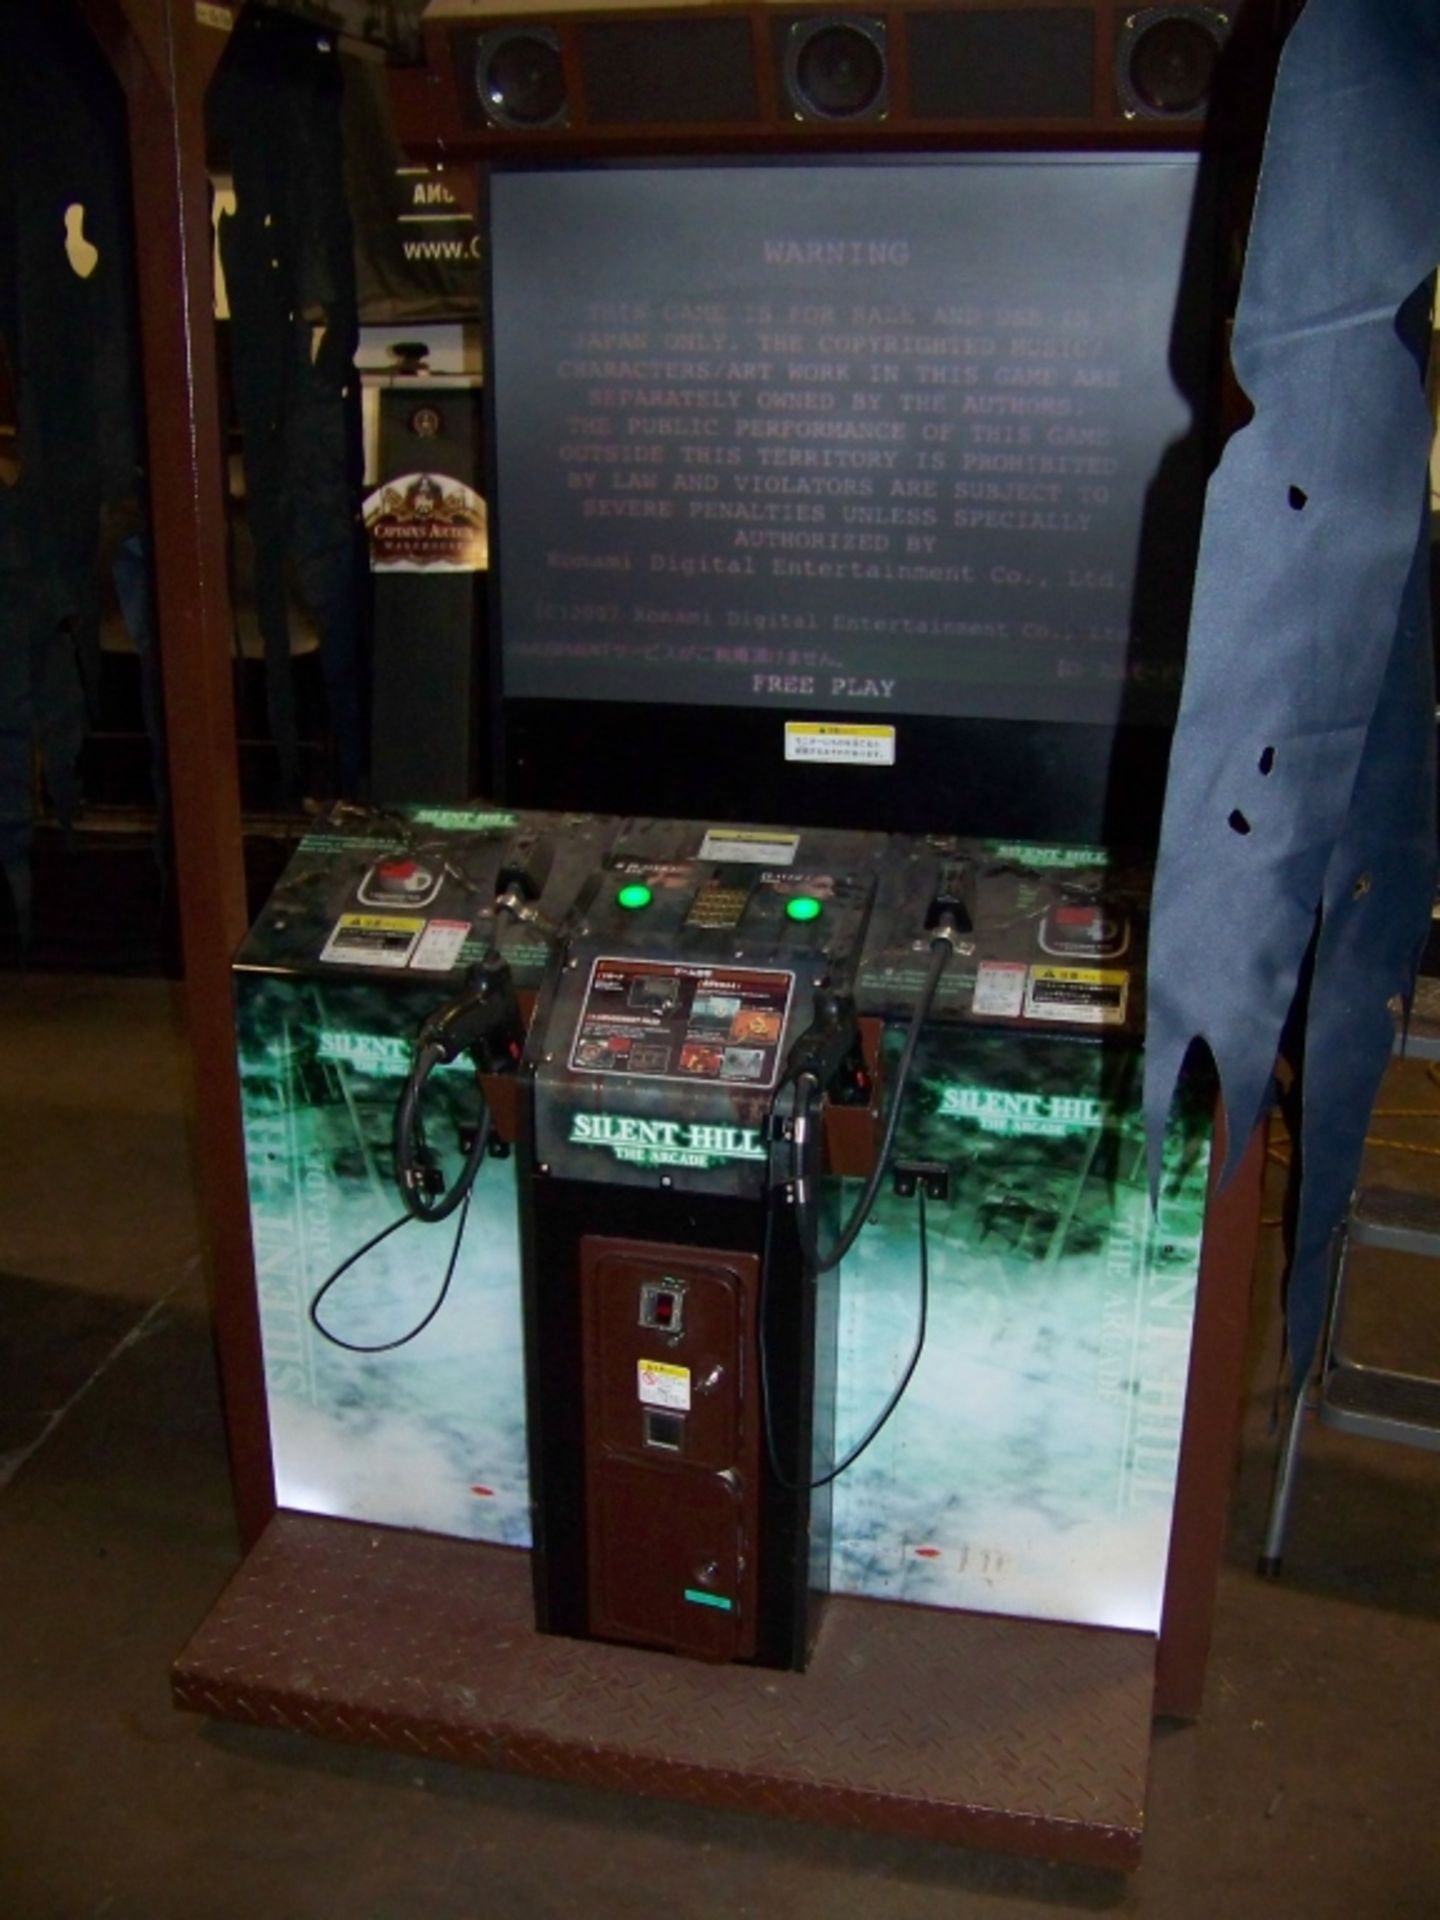 SILENT HILL DX SHOOTER ZOMBIE KONAMI ARCADE GAME - Image 6 of 7